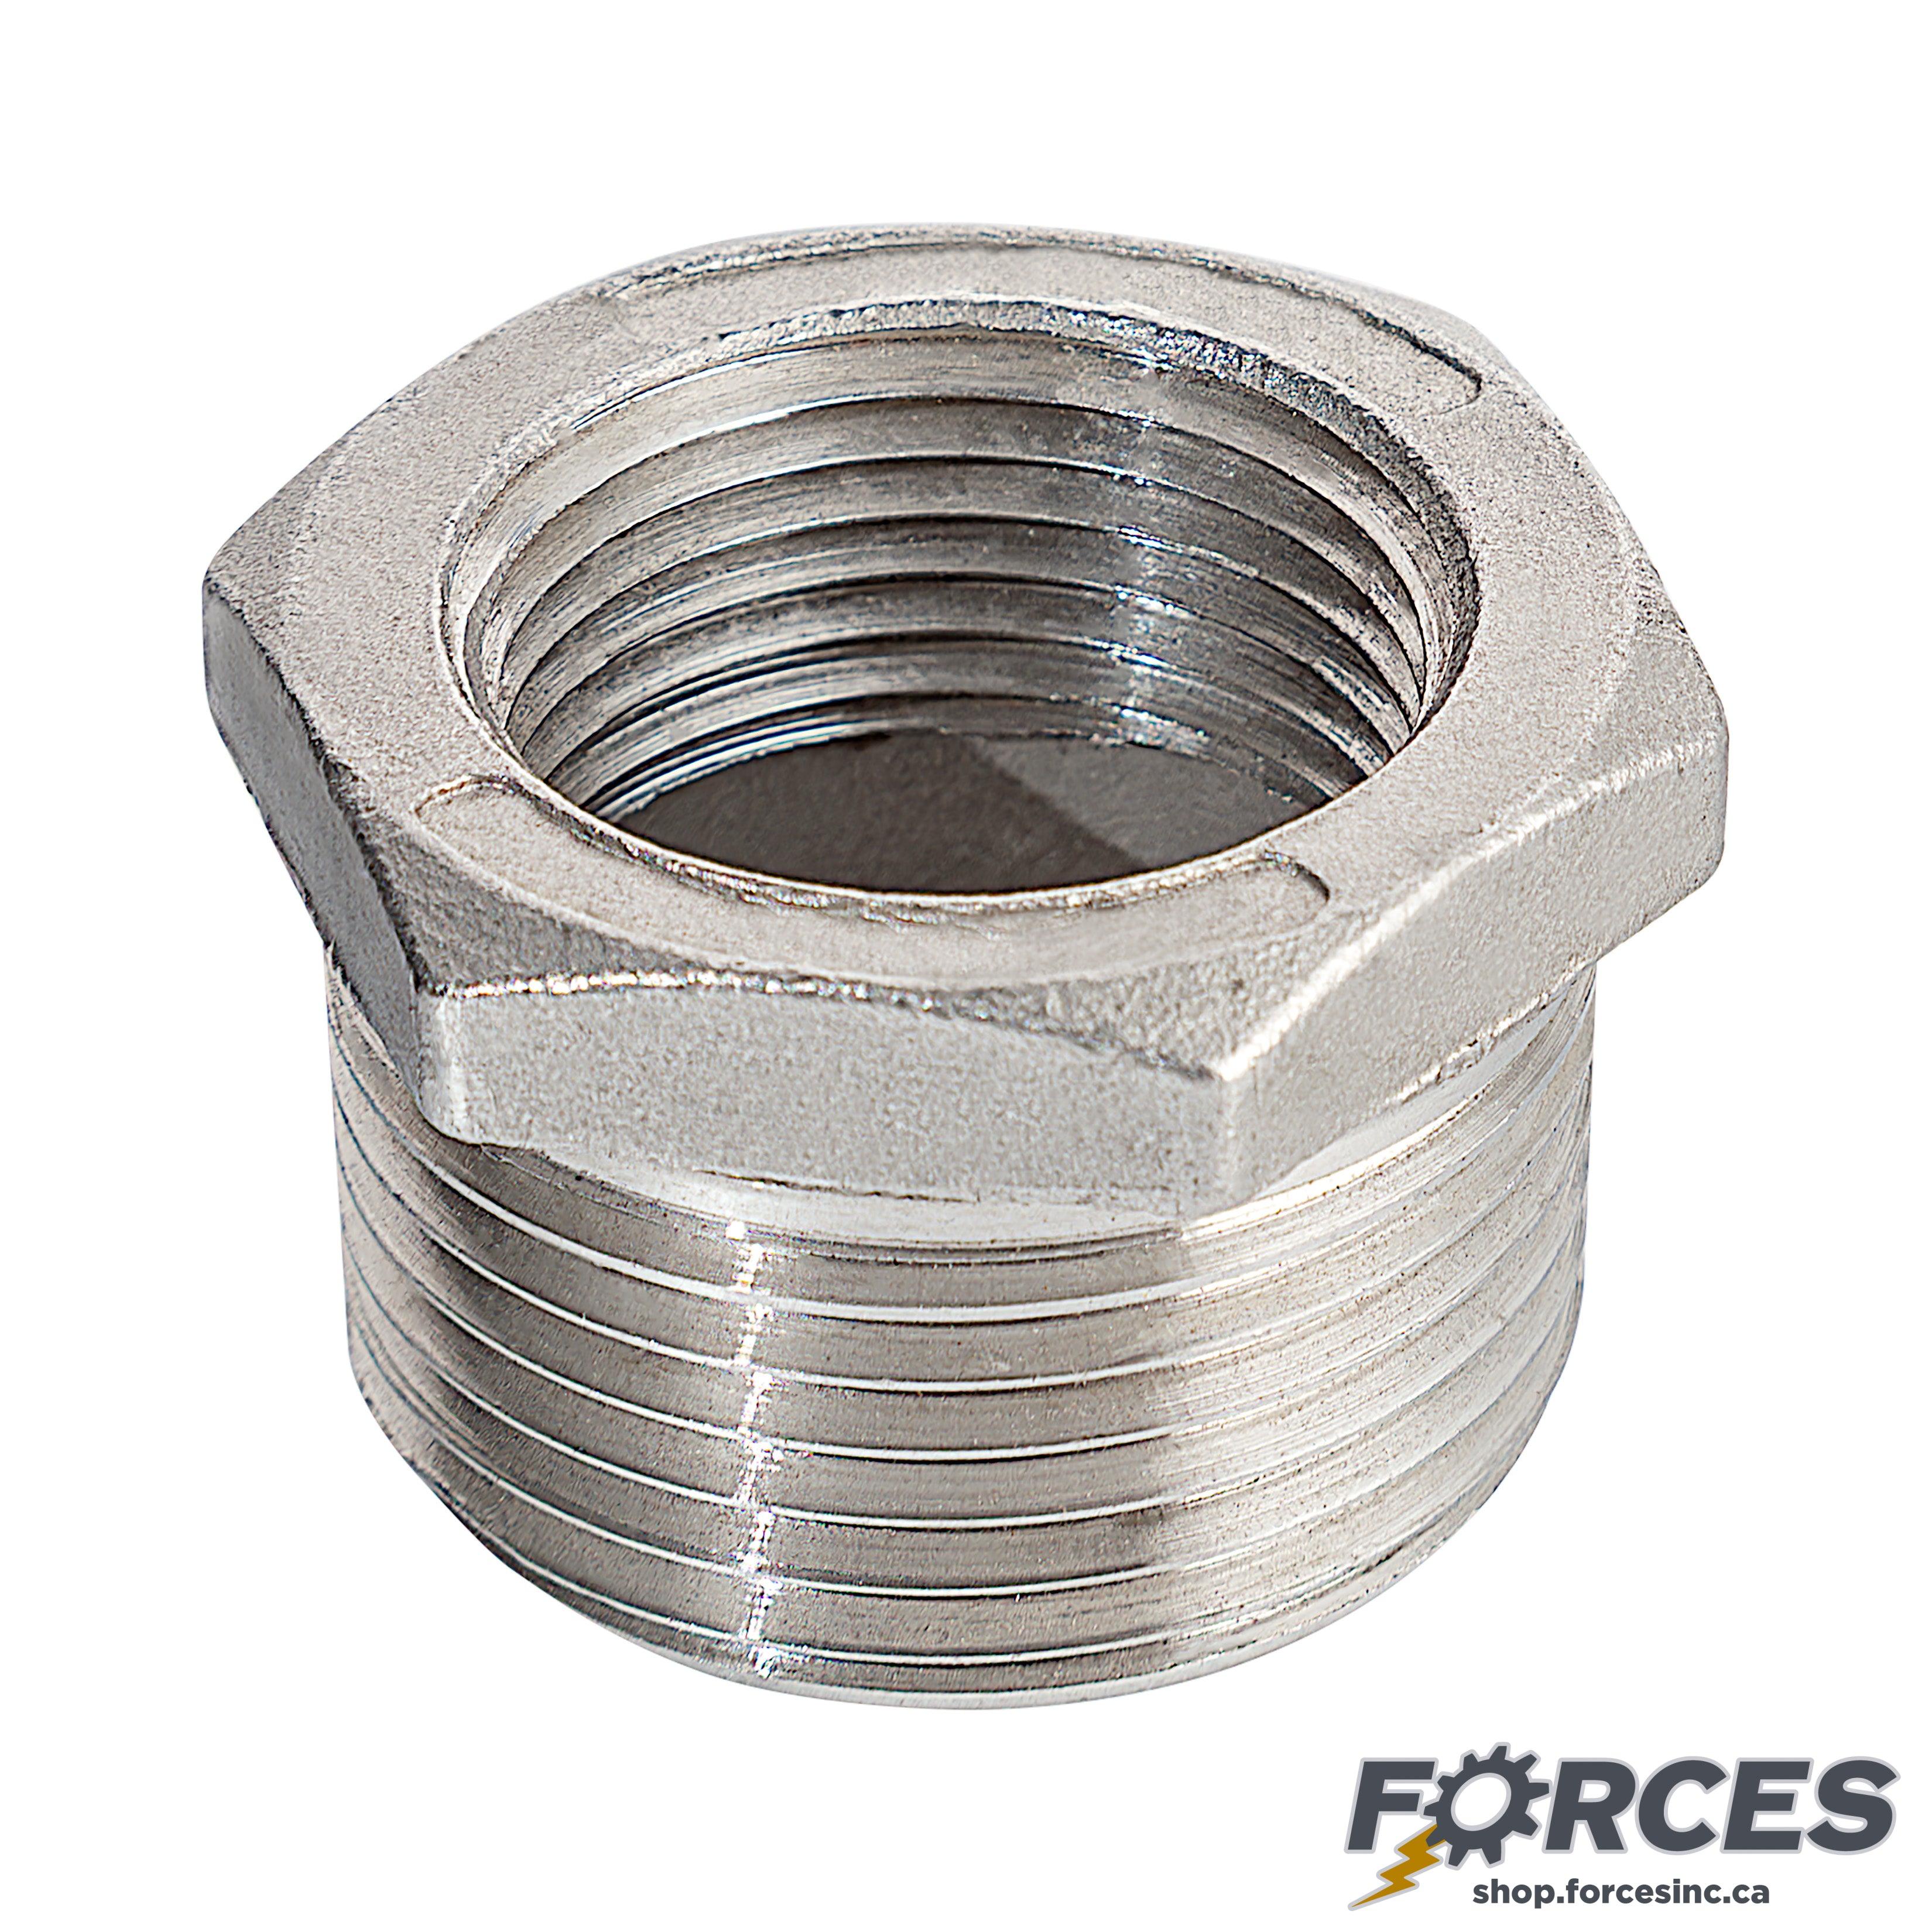 1-1/2" (M) x 3/4" (F) Reducing Hex Bushing NPT #150 - Stainless Steel 316 - Forces Inc